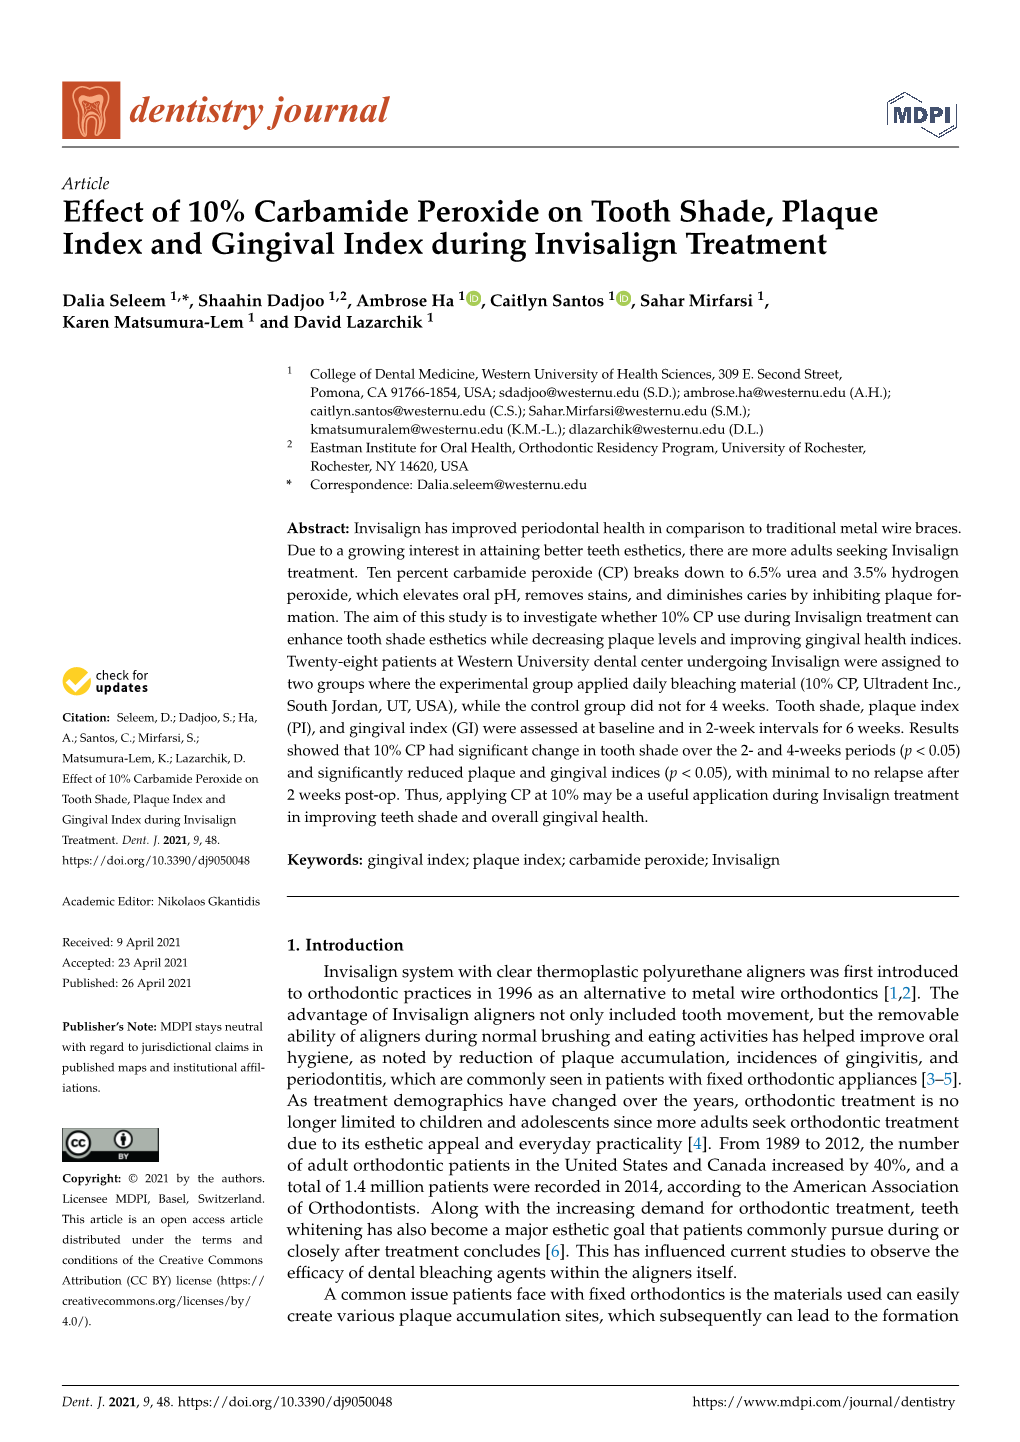 Effect of 10% Carbamide Peroxide on Tooth Shade, Plaque Index and Gingival Index During Invisalign Treatment